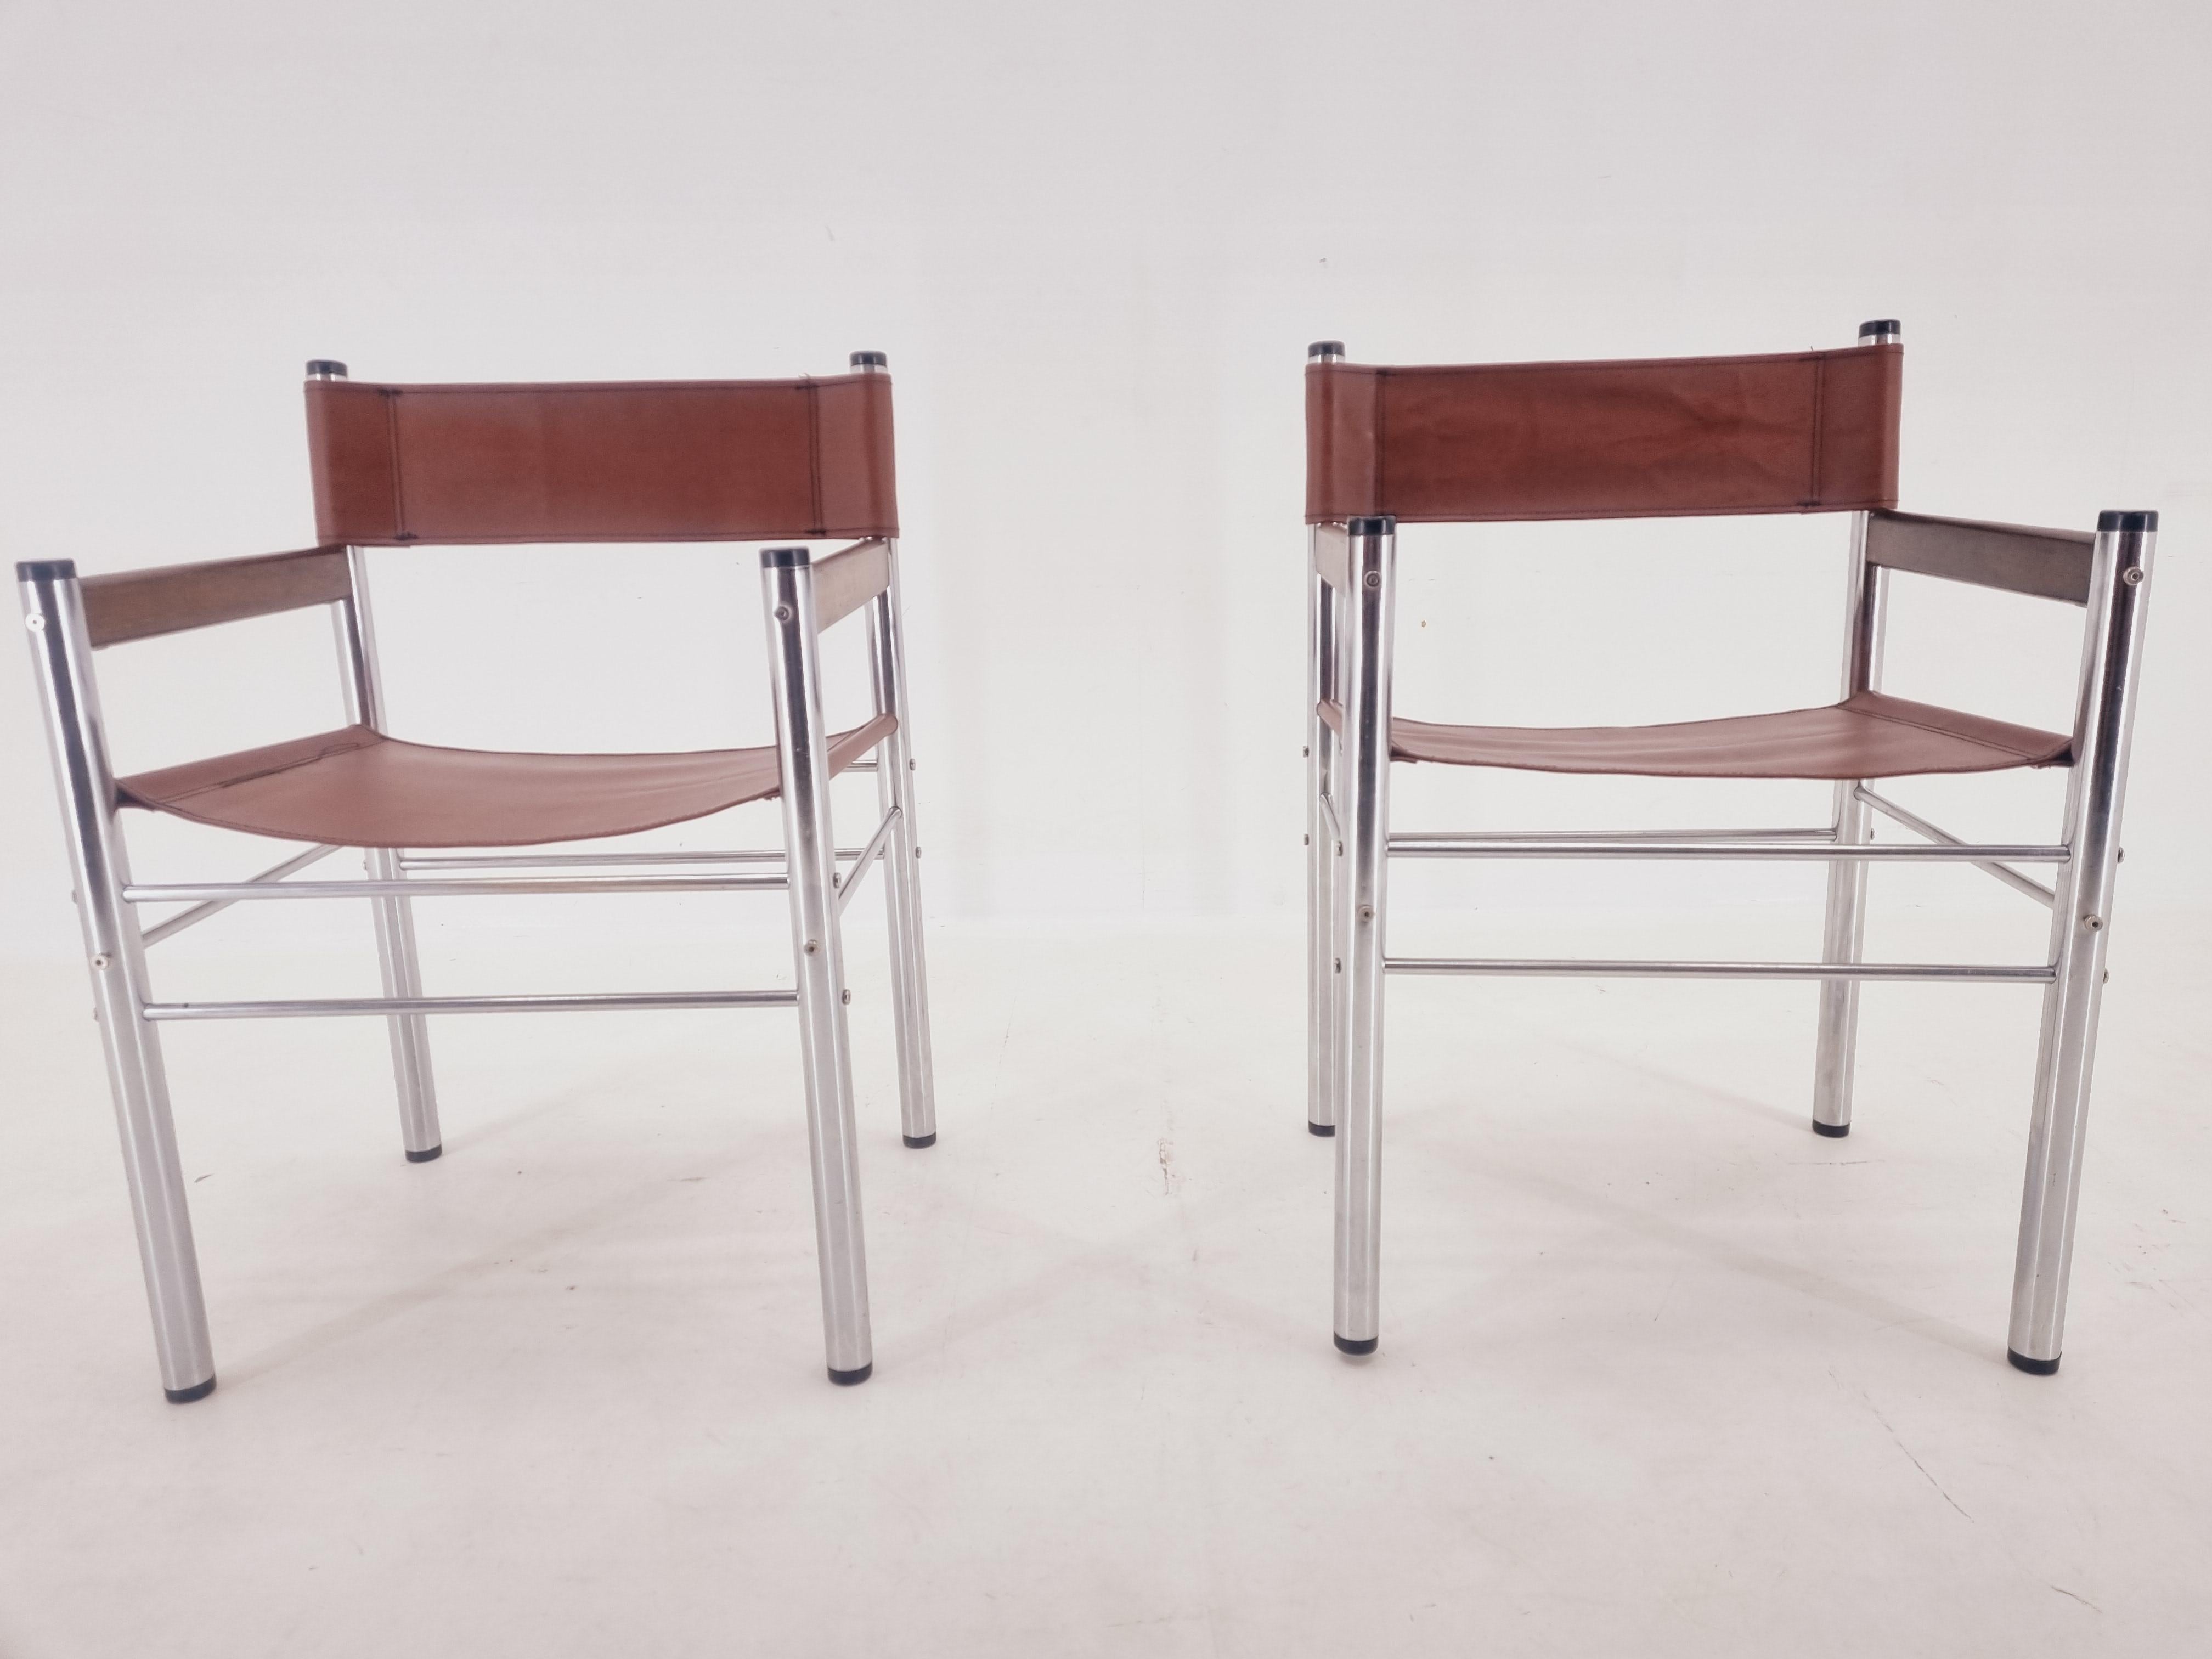 Pair of Rare Midcentury Tubular Design Armchairs, Germany, 1970s For Sale 3